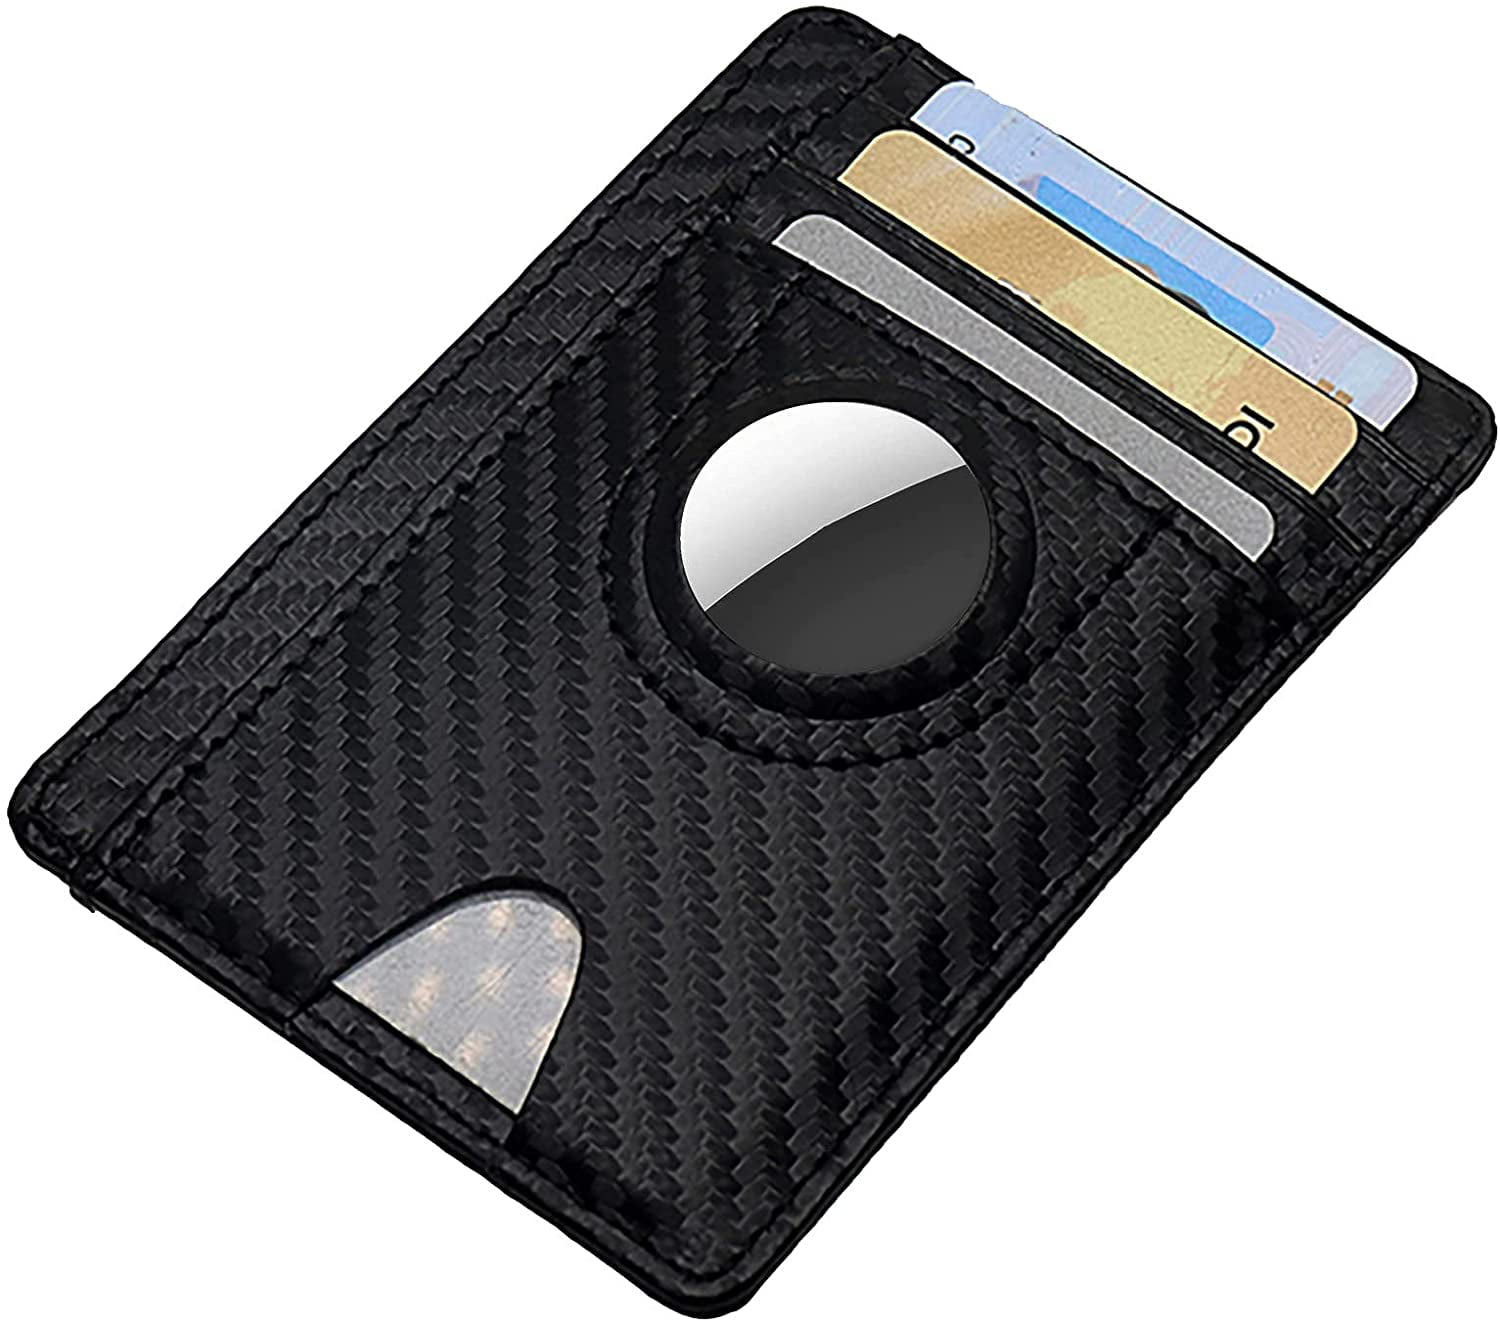 Black Slim Air tag Wallet Holder for Cards and Cash Compatible for Airtag Wallet Case Wallet with Slot Compatible with Airtag 